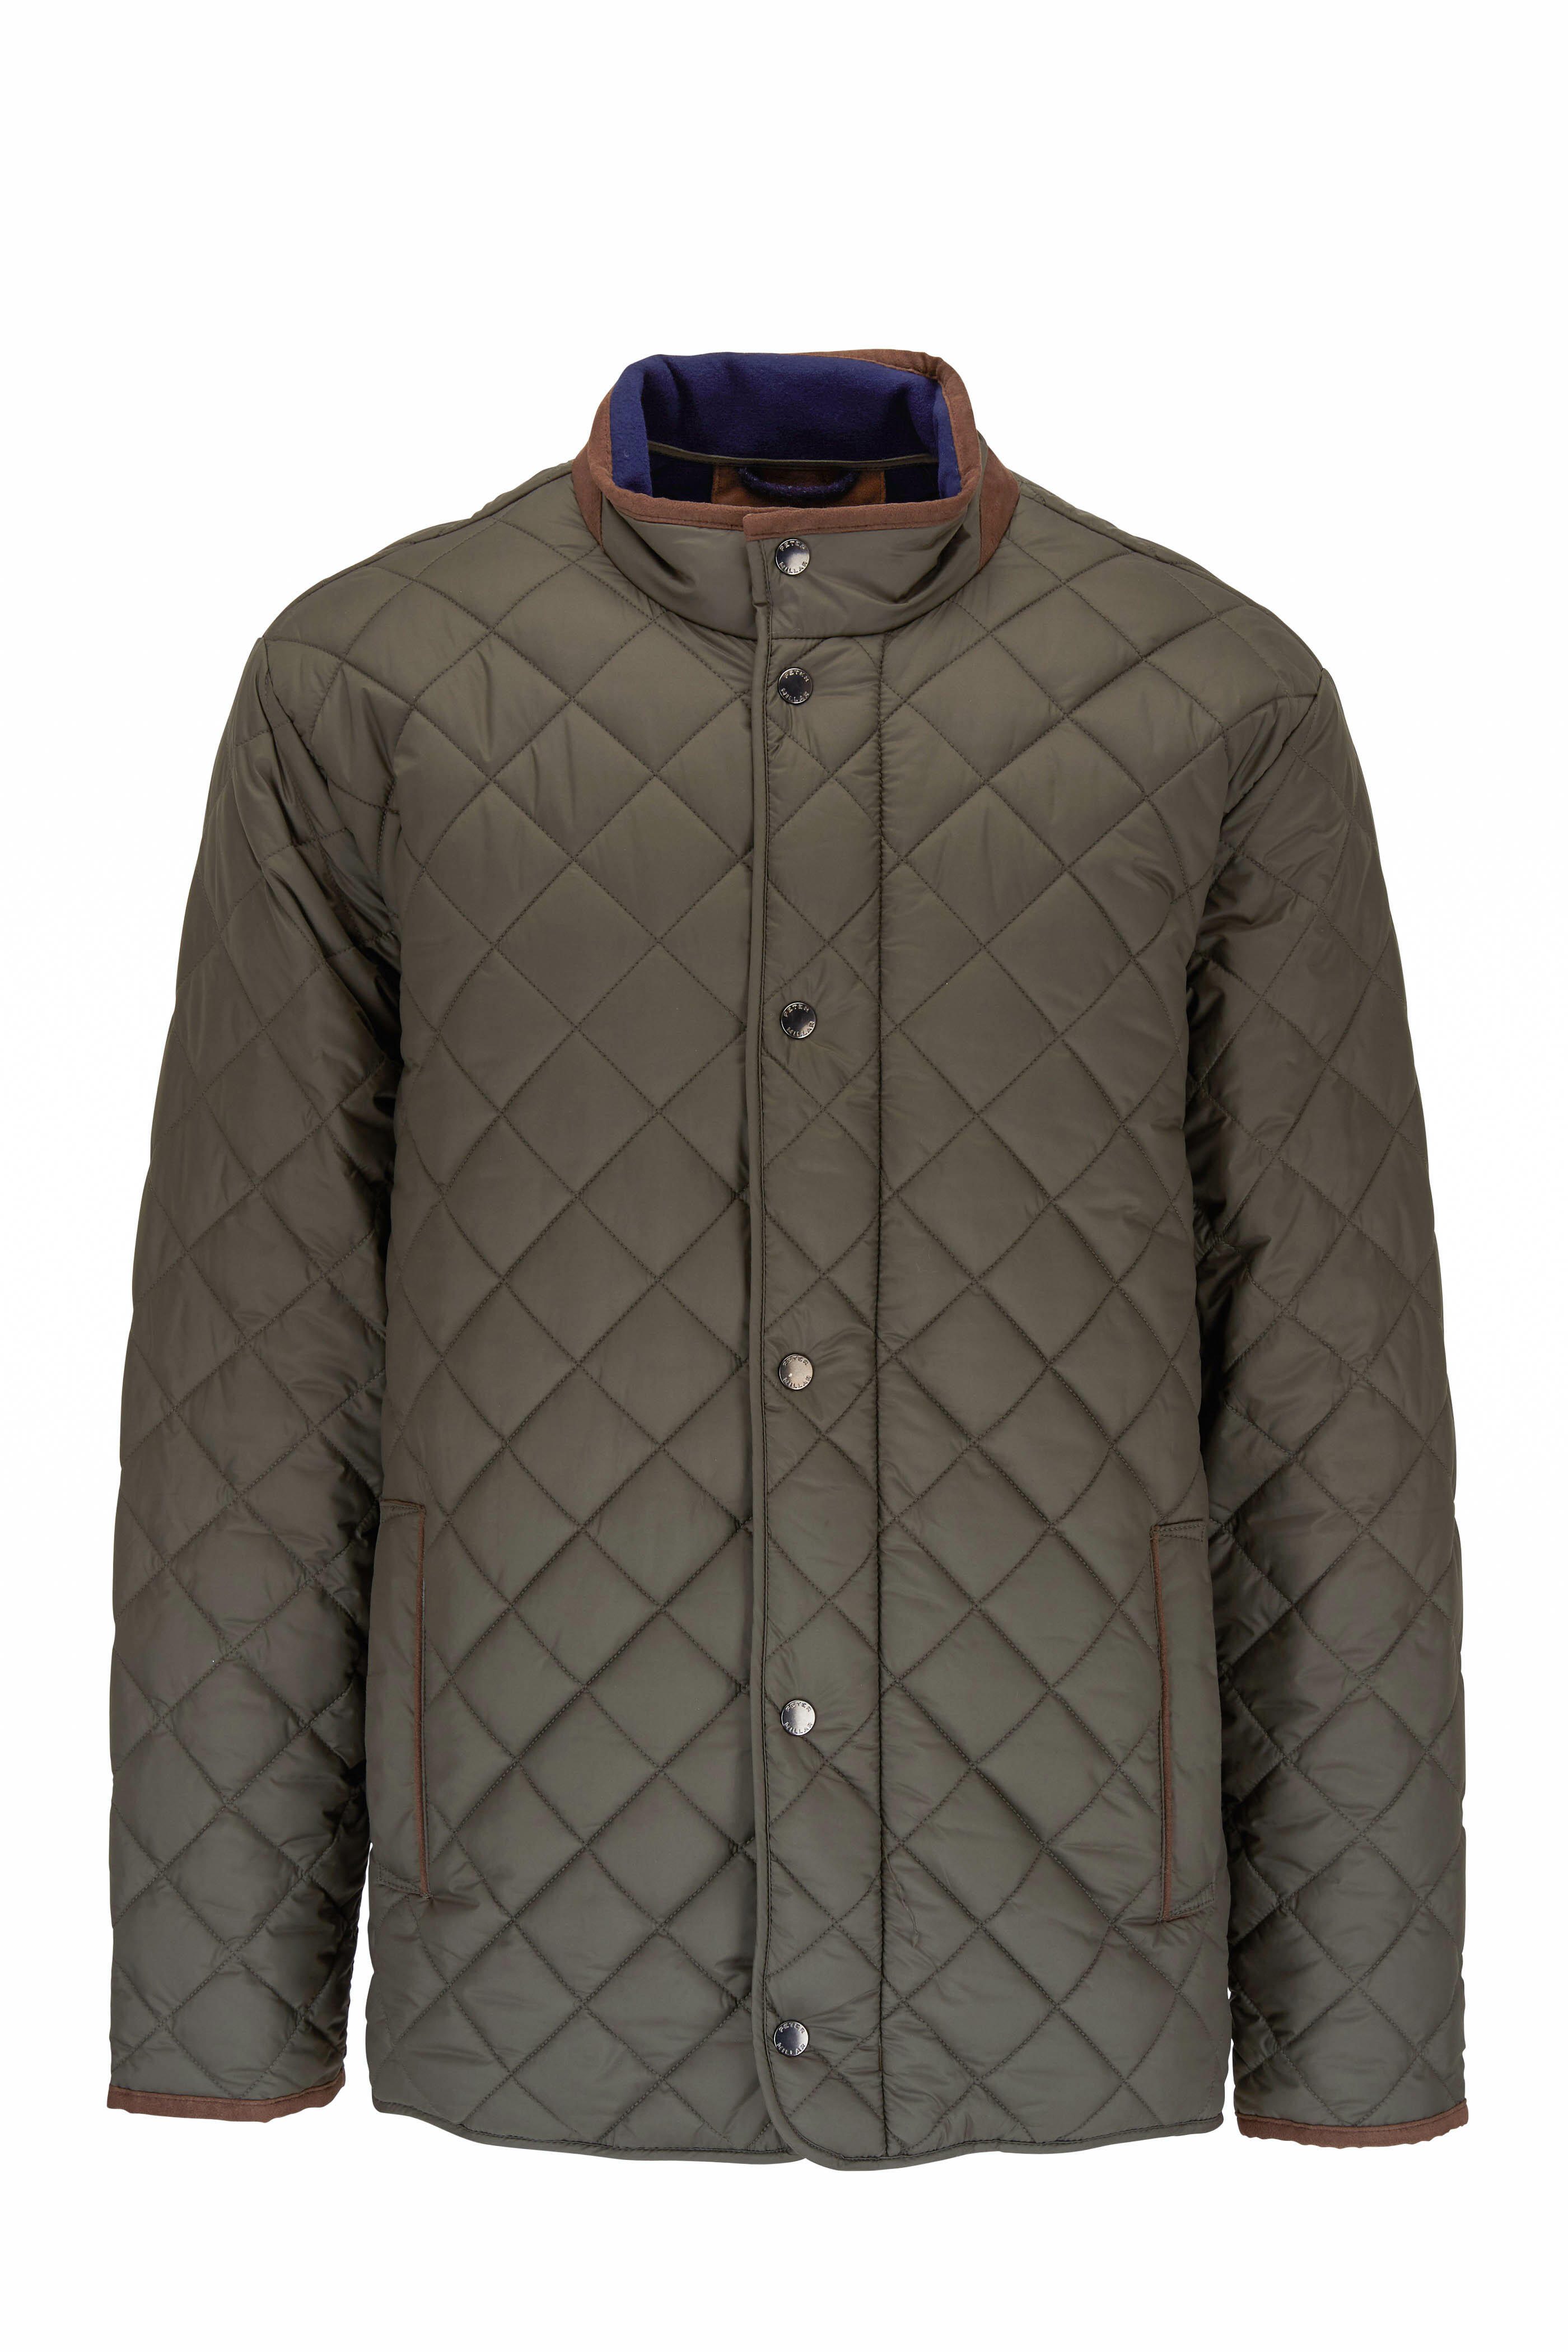 Peter Millar - Suffolk Olive Green Diamond Quilted Travel Jacket